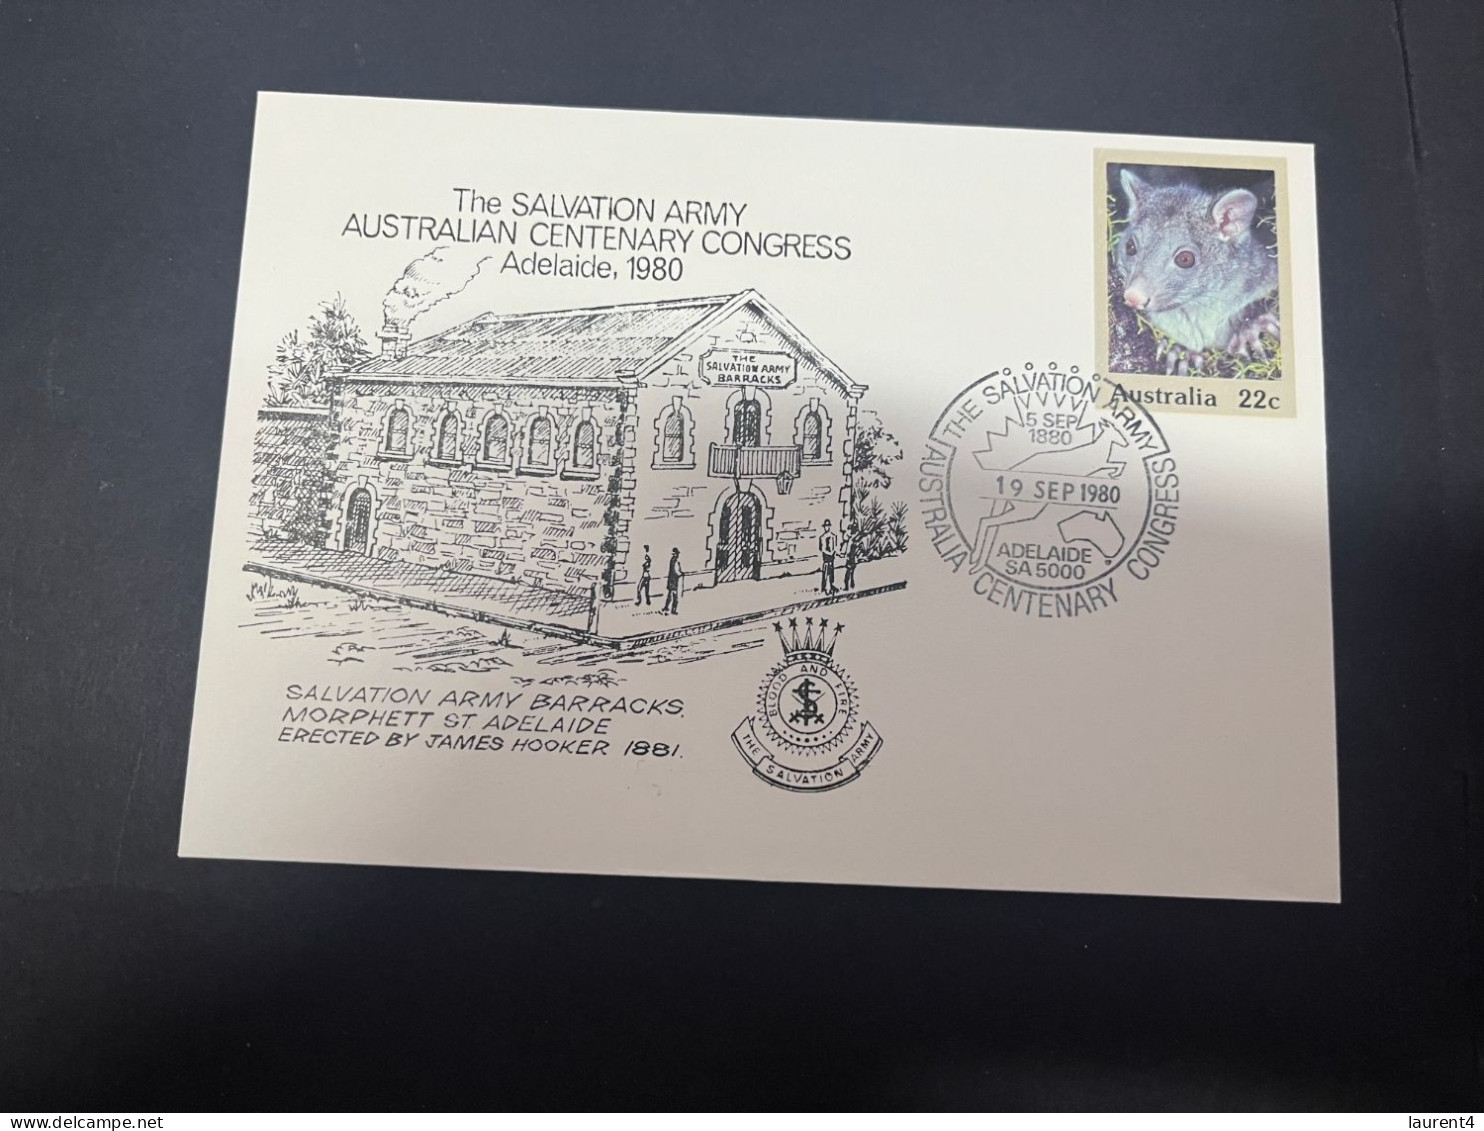 2-5-2024 (3 Z 39) Australia FDC (1 Covers) 1980 - Salvation Army Australian Centenary Congress In Adelaide (Brushtail) - Premiers Jours (FDC)